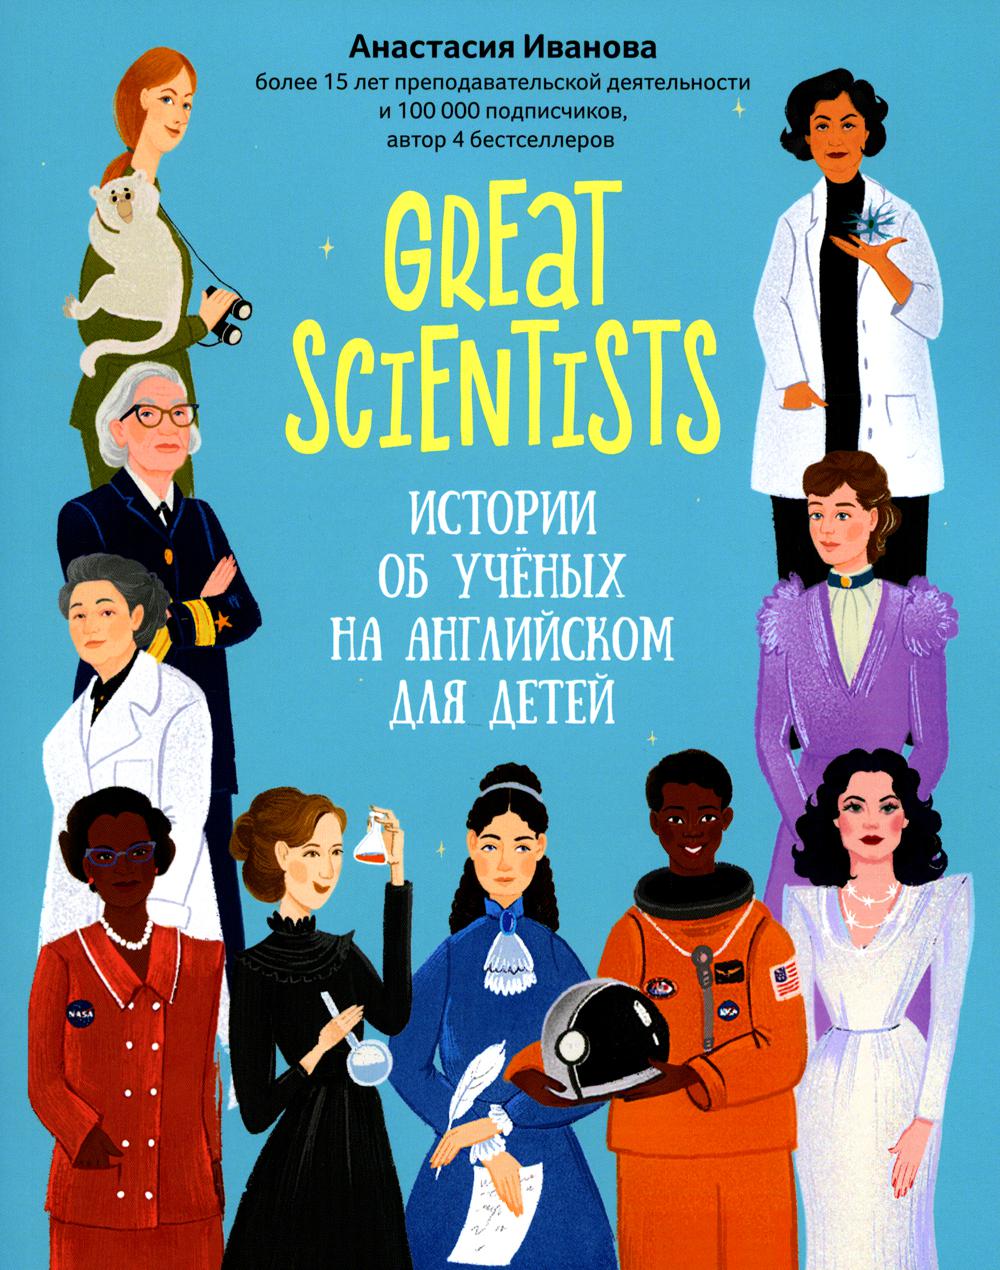 Great Scientists       